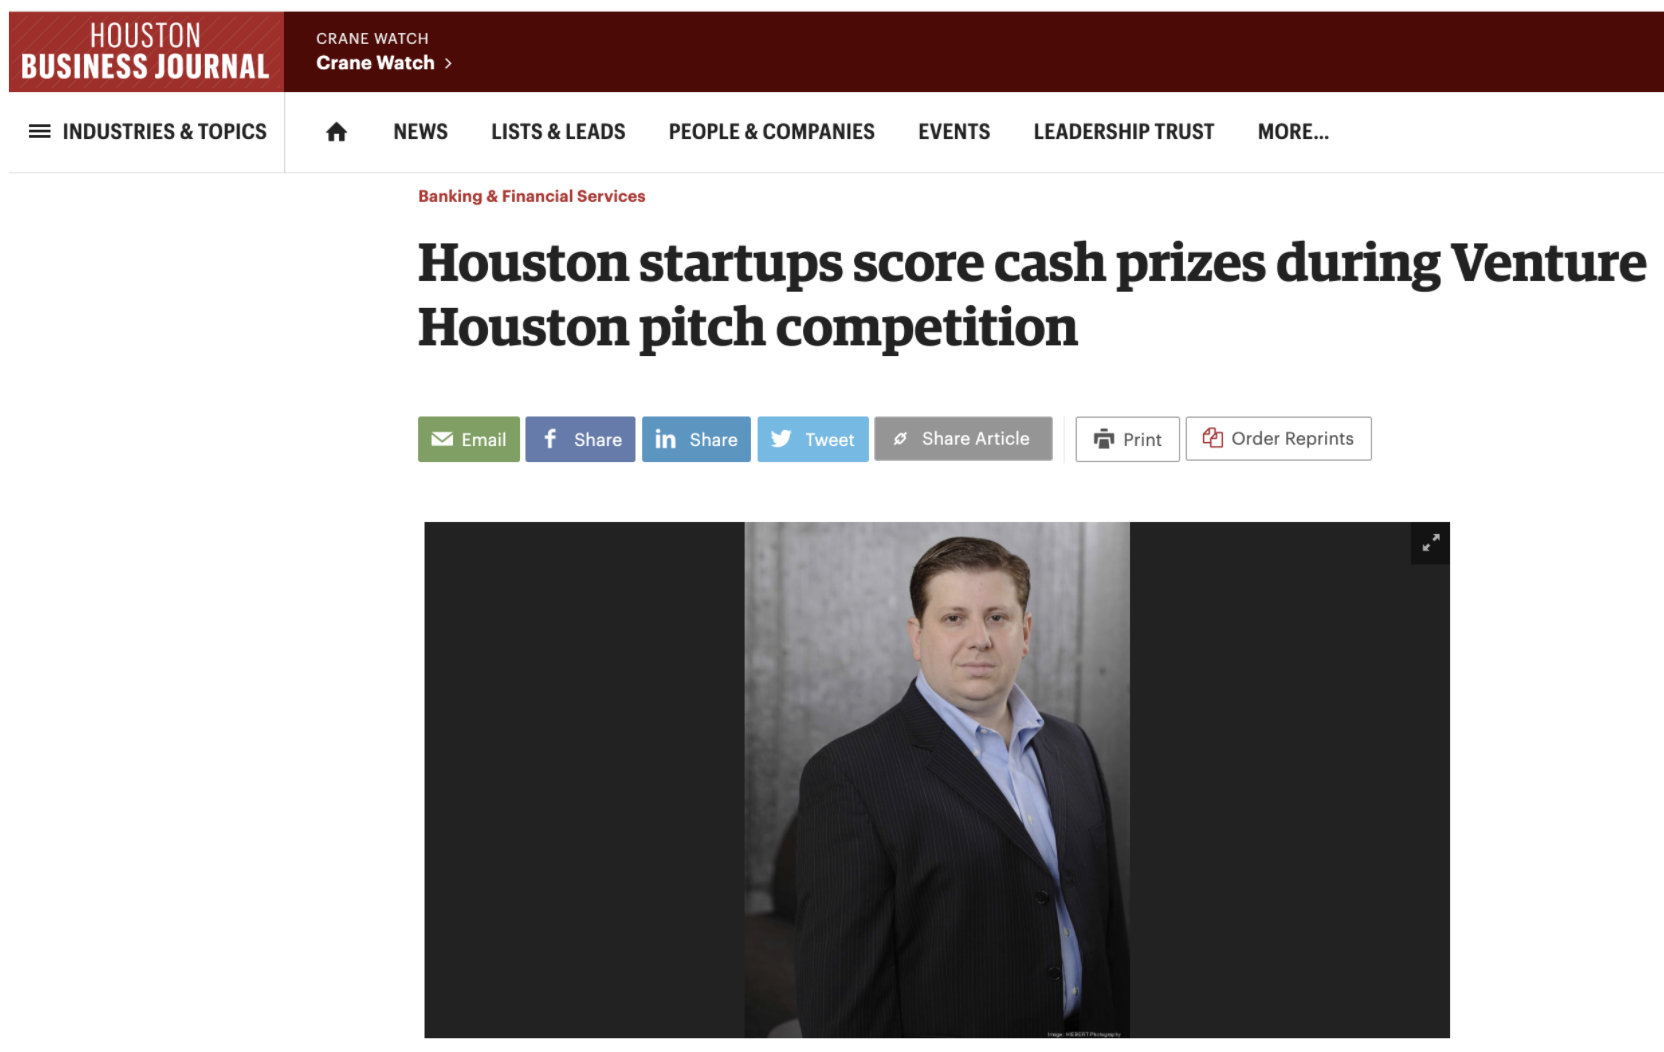 Female Founded Houston Startup Scores During Venture Houston Pitch